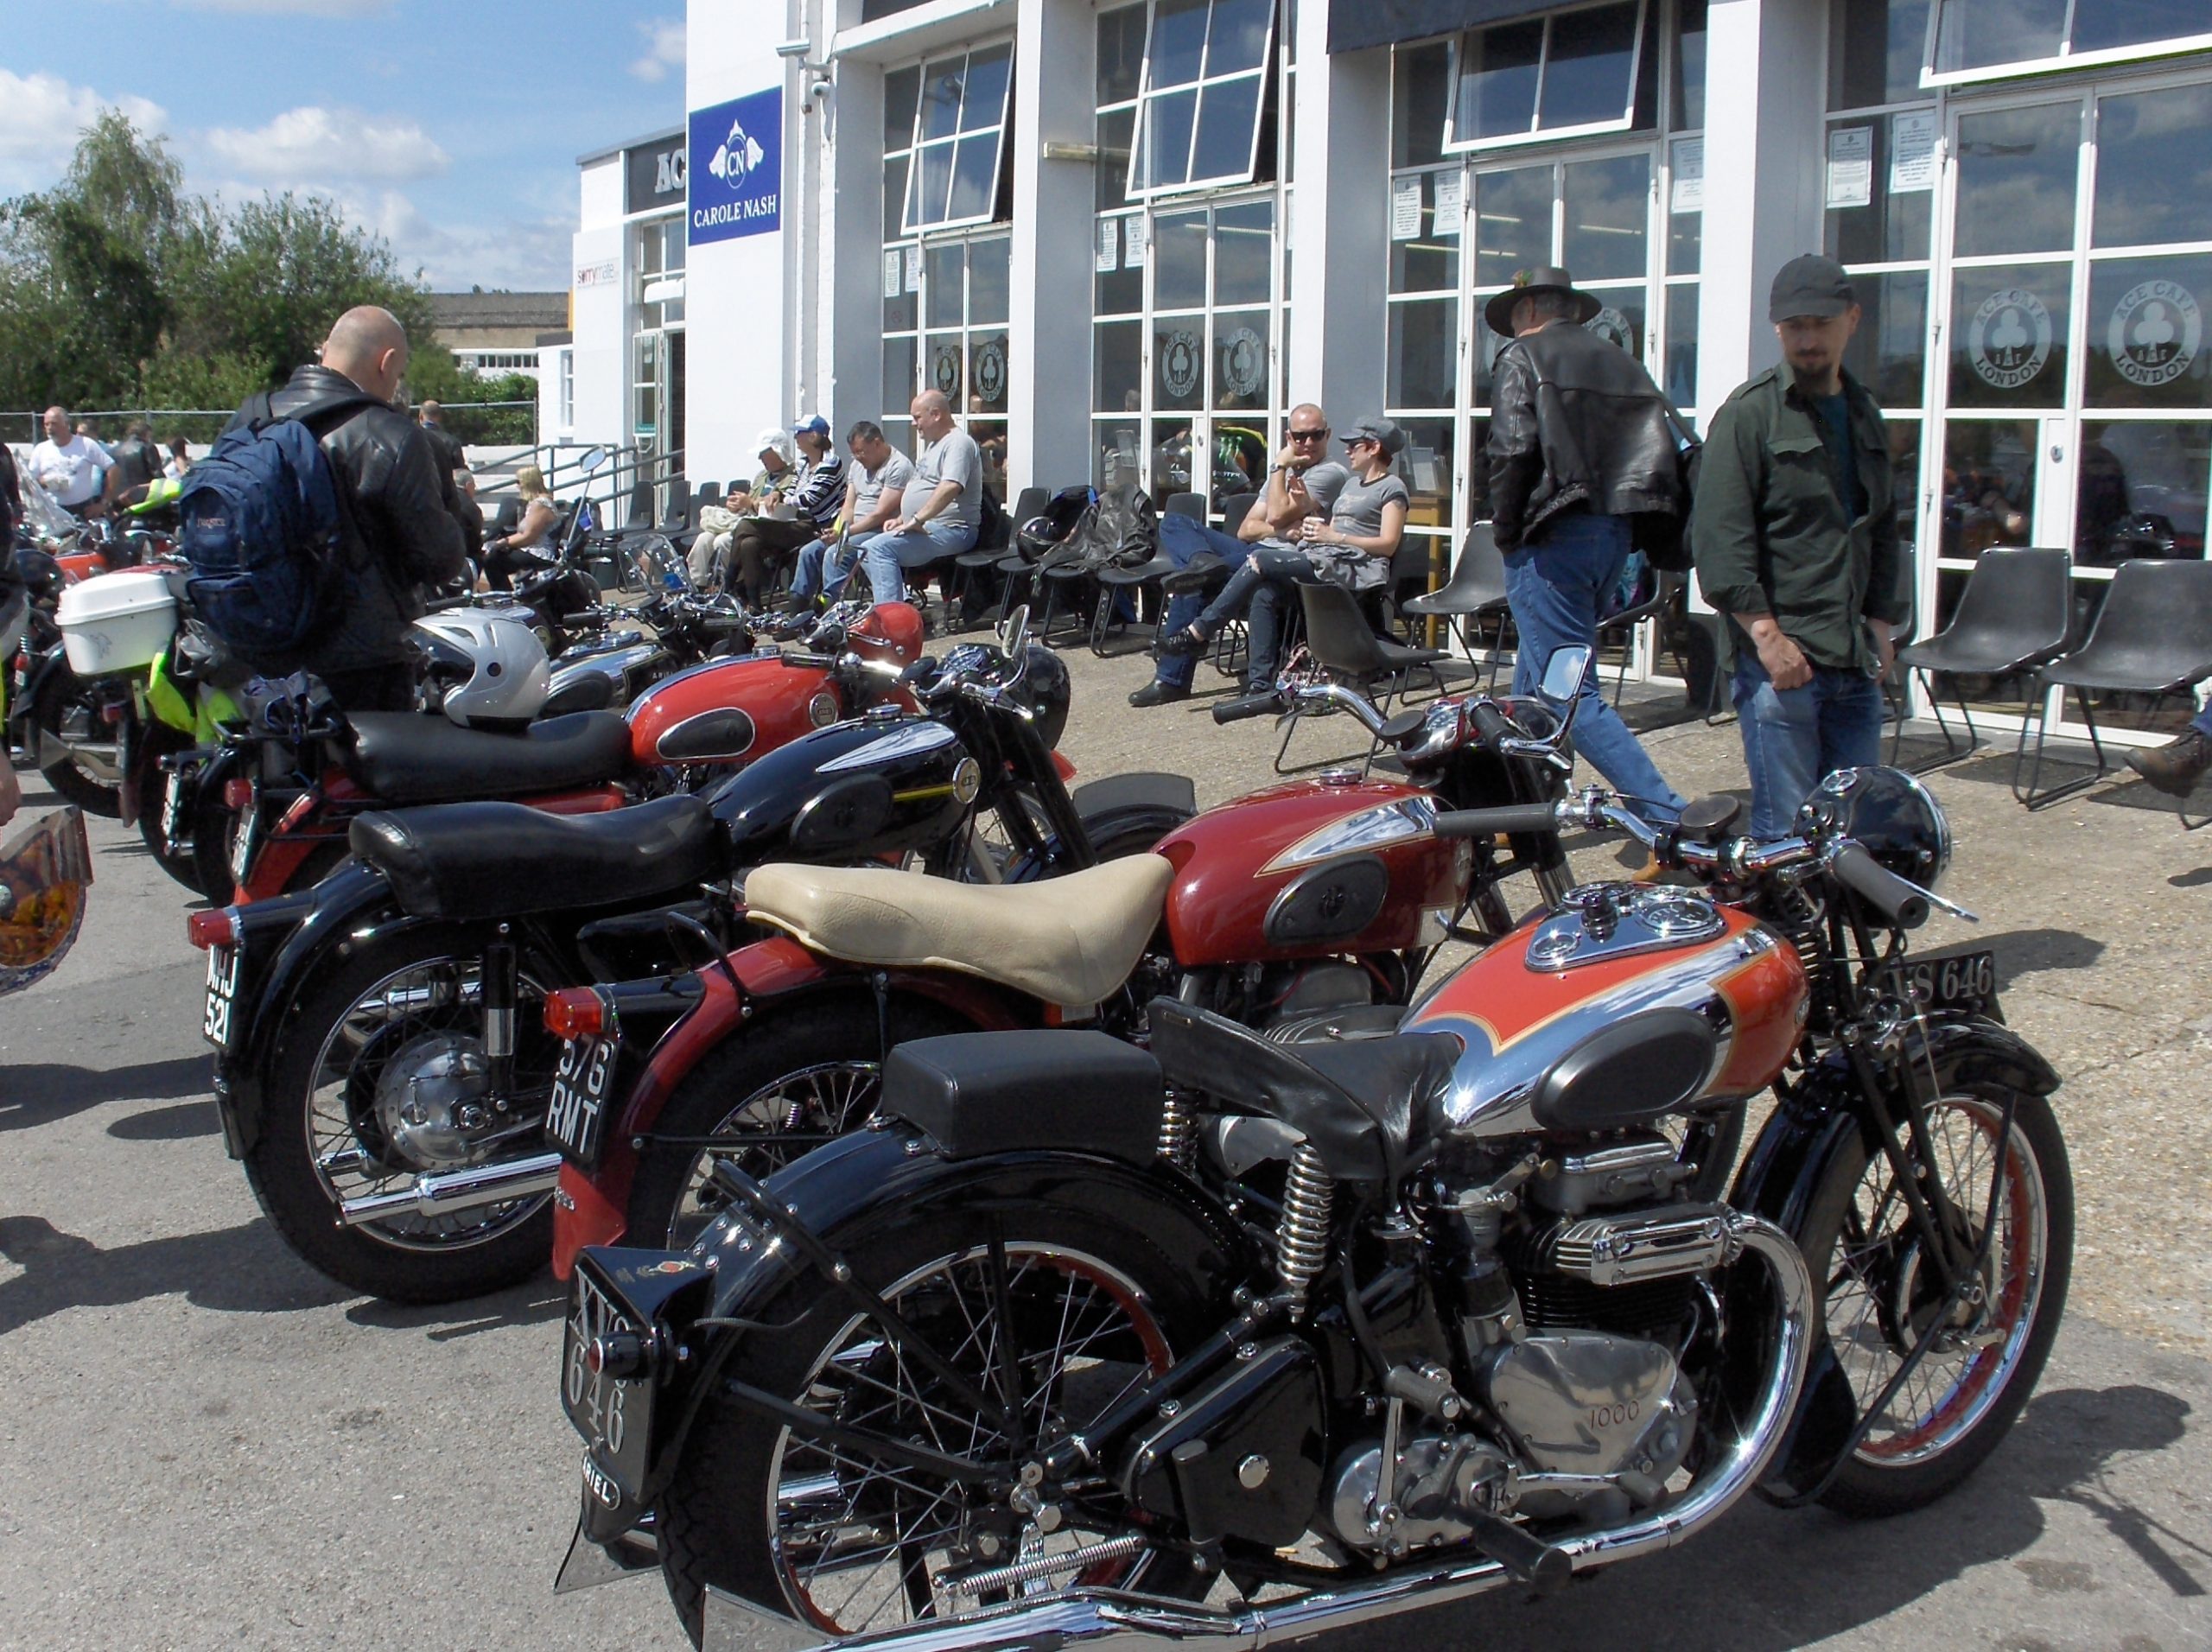 Ariel Owners "founders Day" & Classic Bikes